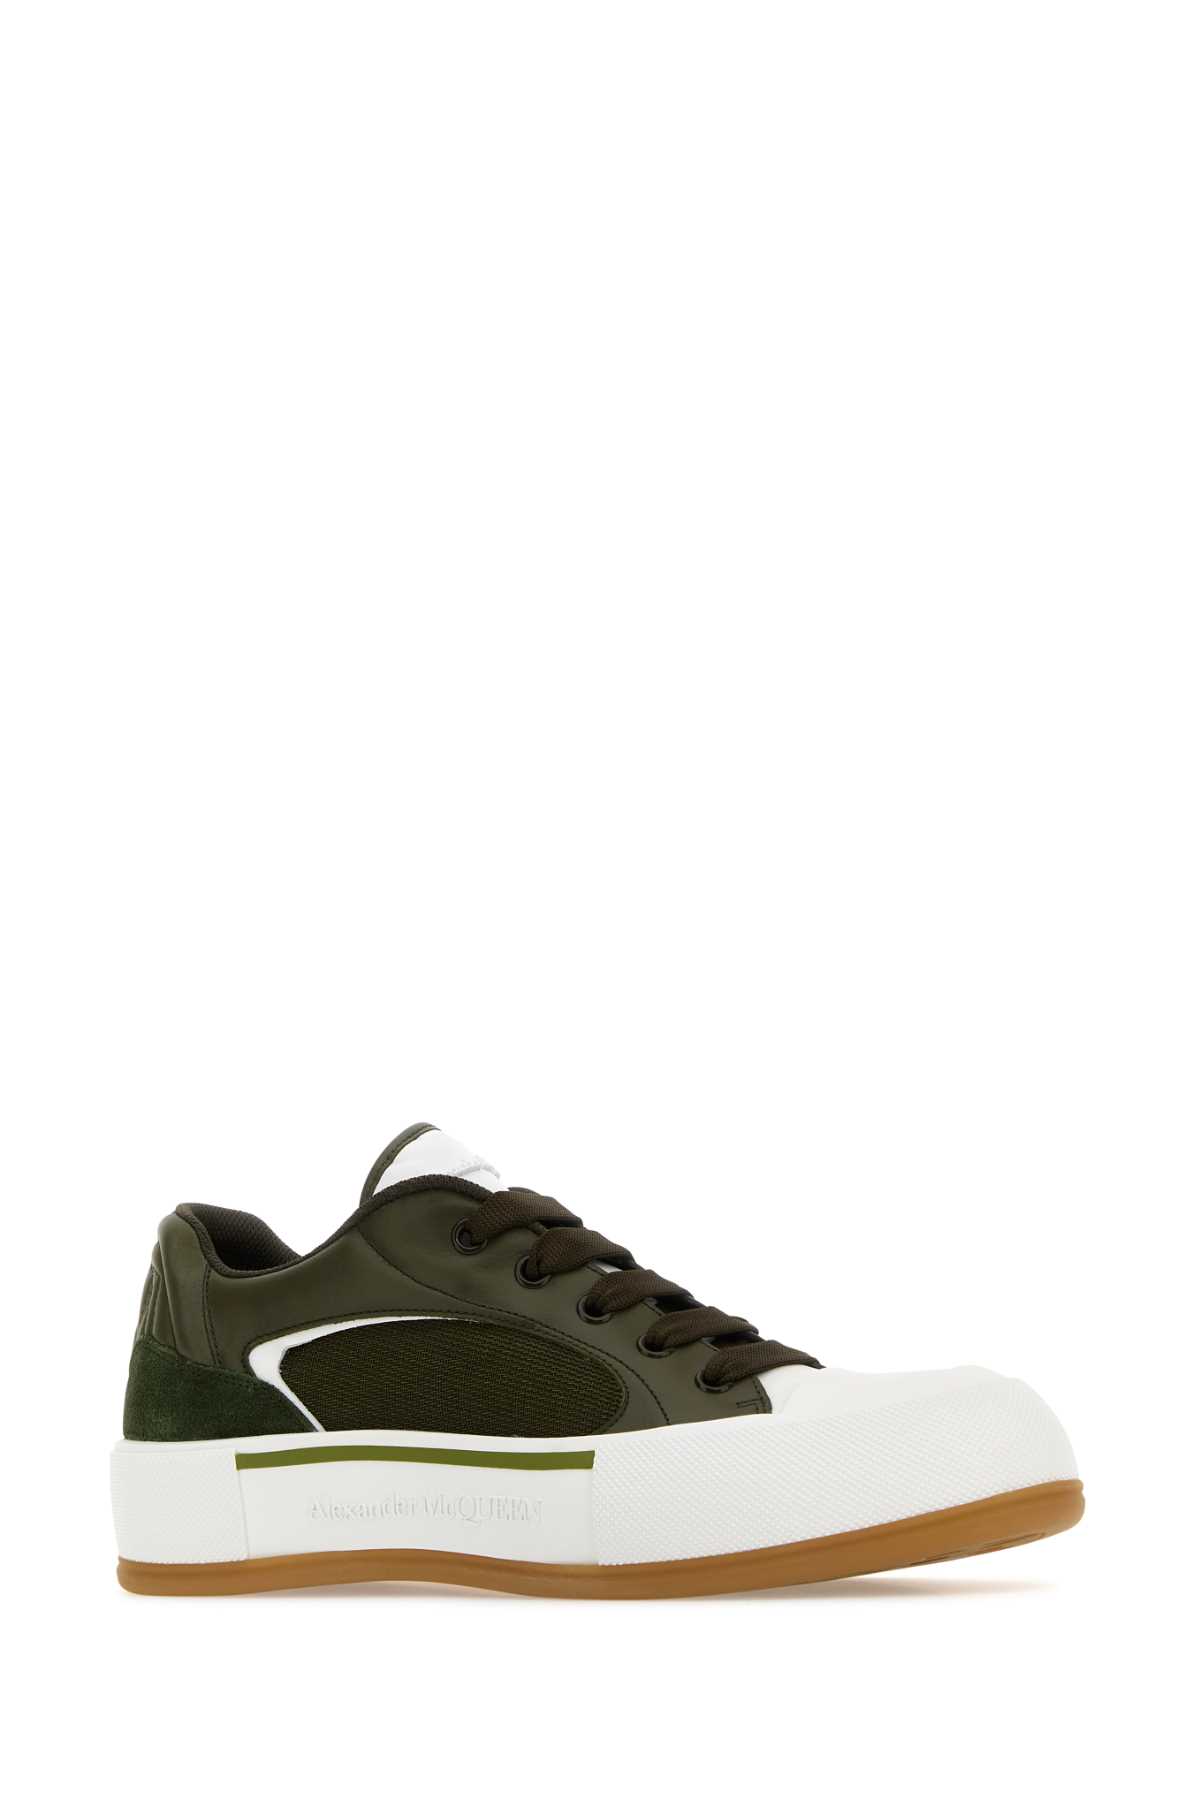 Alexander Mcqueen Olive Green Plimsoll Trainers In Khakipakhawhiam